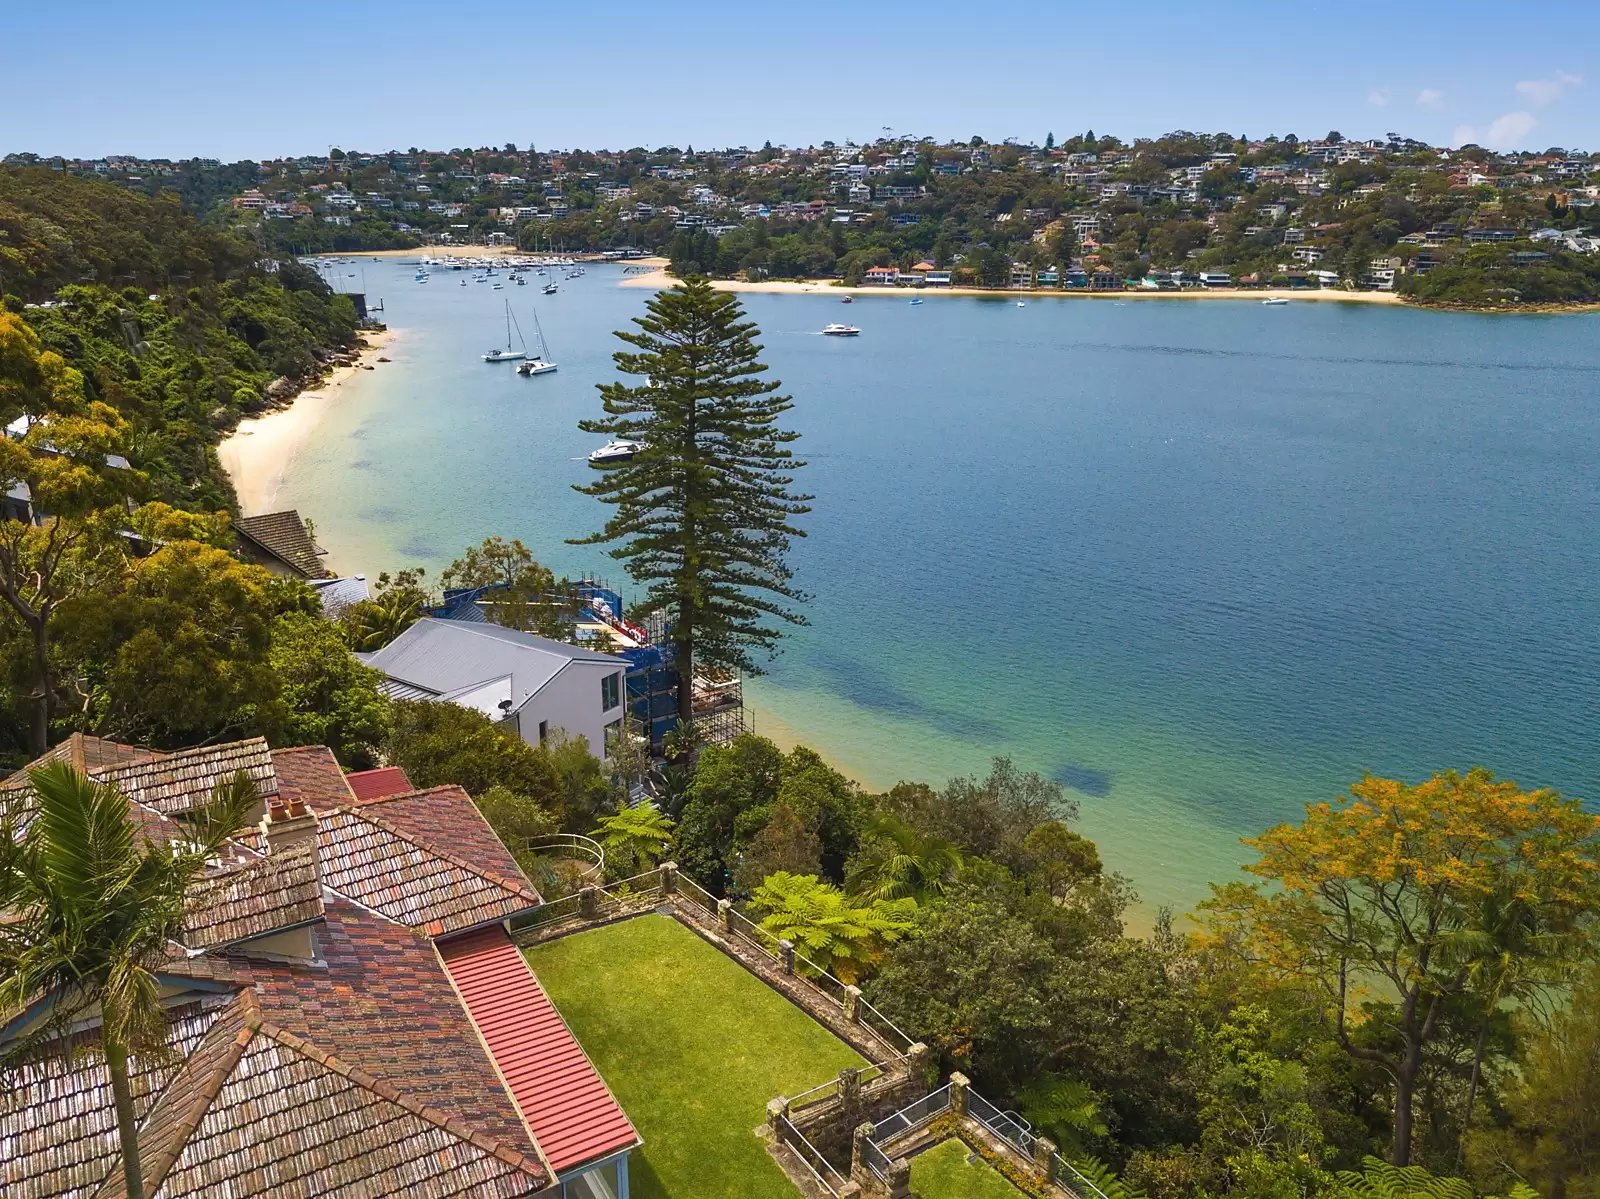 Photo #5: 51 Parriwi Road, Mosman - Sold by Sydney Sotheby's International Realty